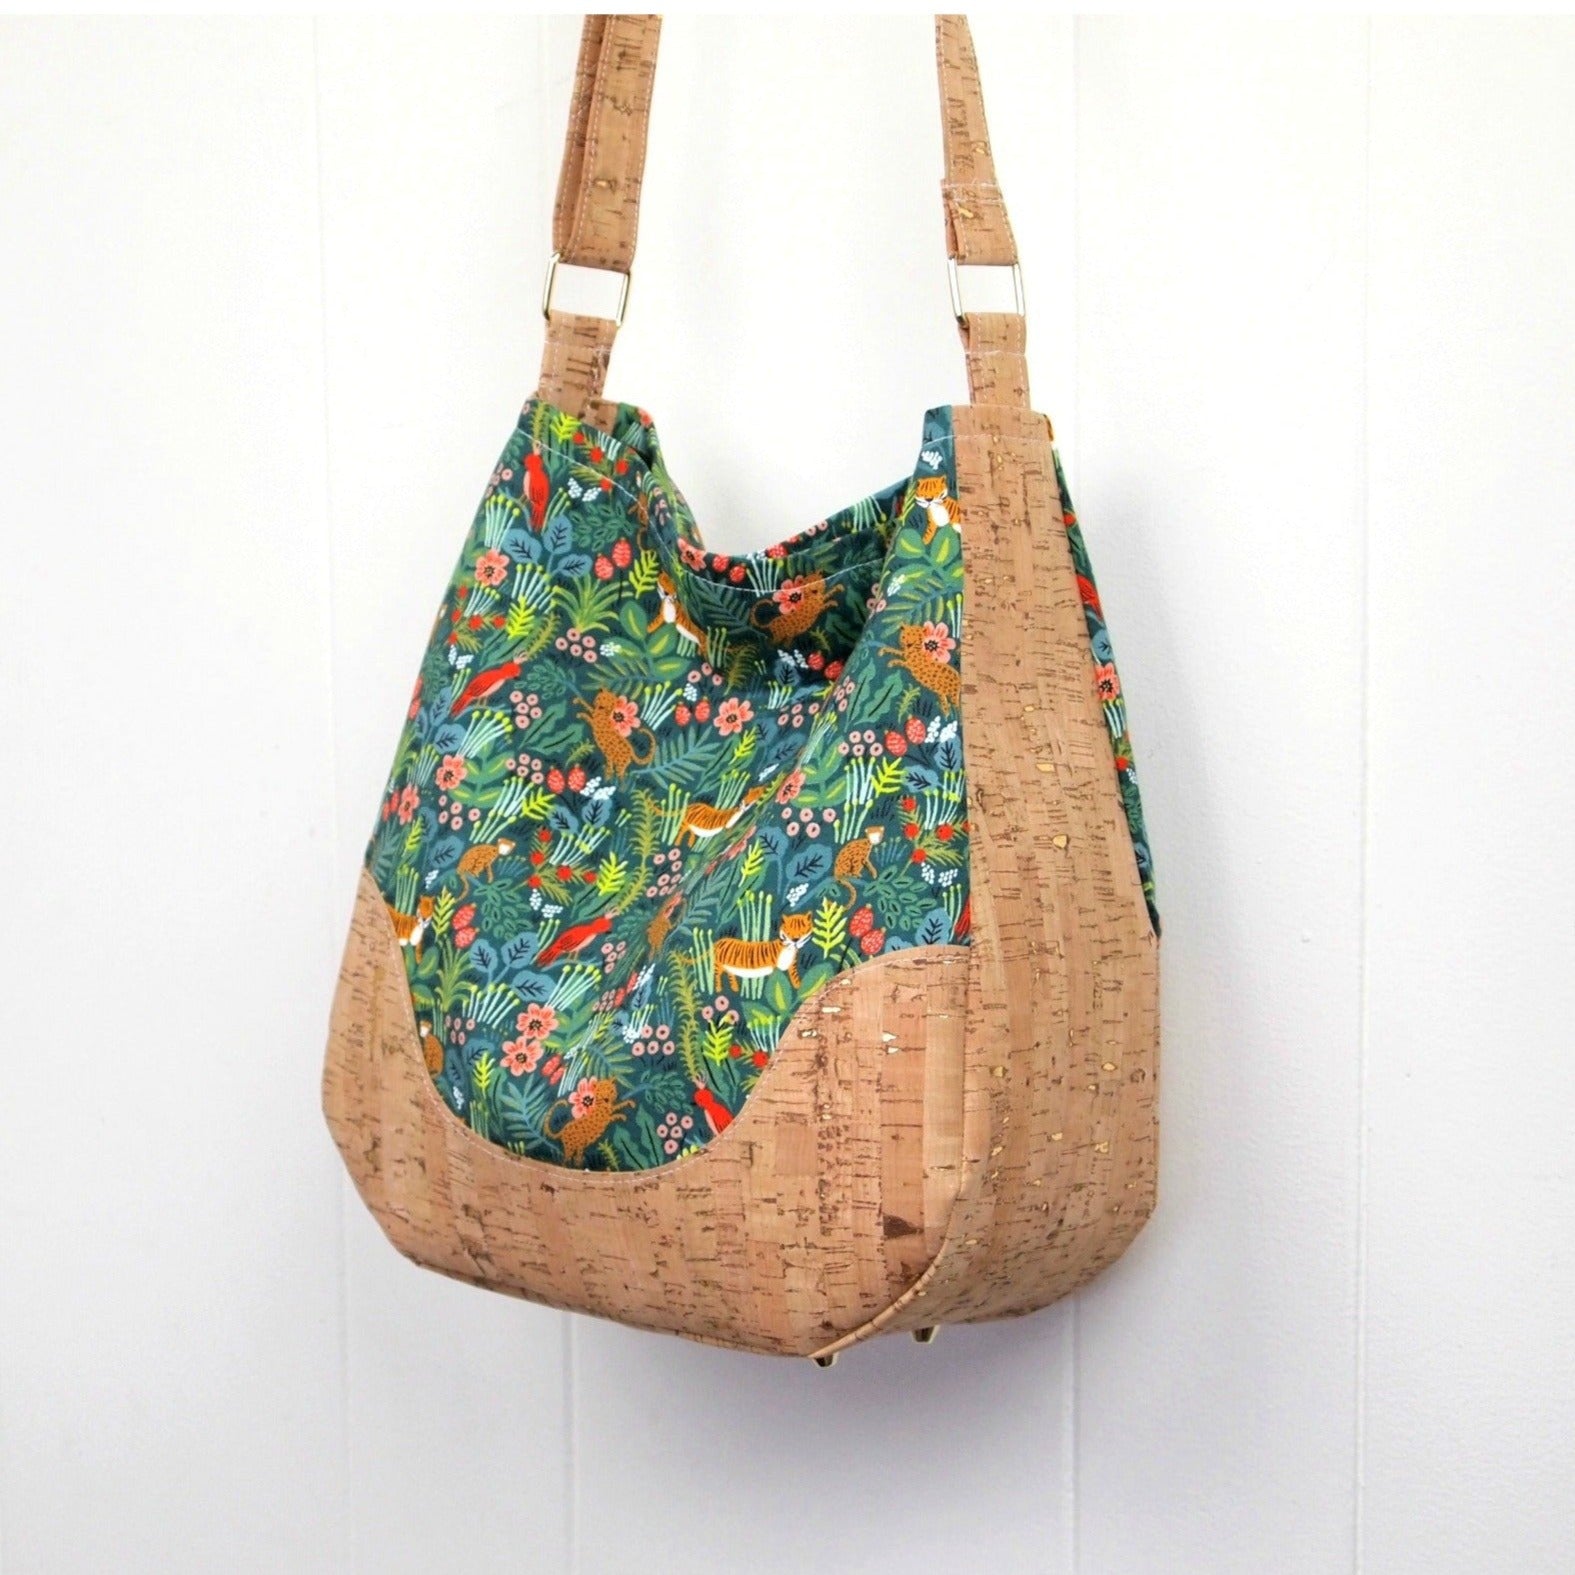 Holly Hobo Bag - Sewing With Cork or Vinyl Fabric Pattern - Sallie Tom –  Prism Fabrics & Crafts